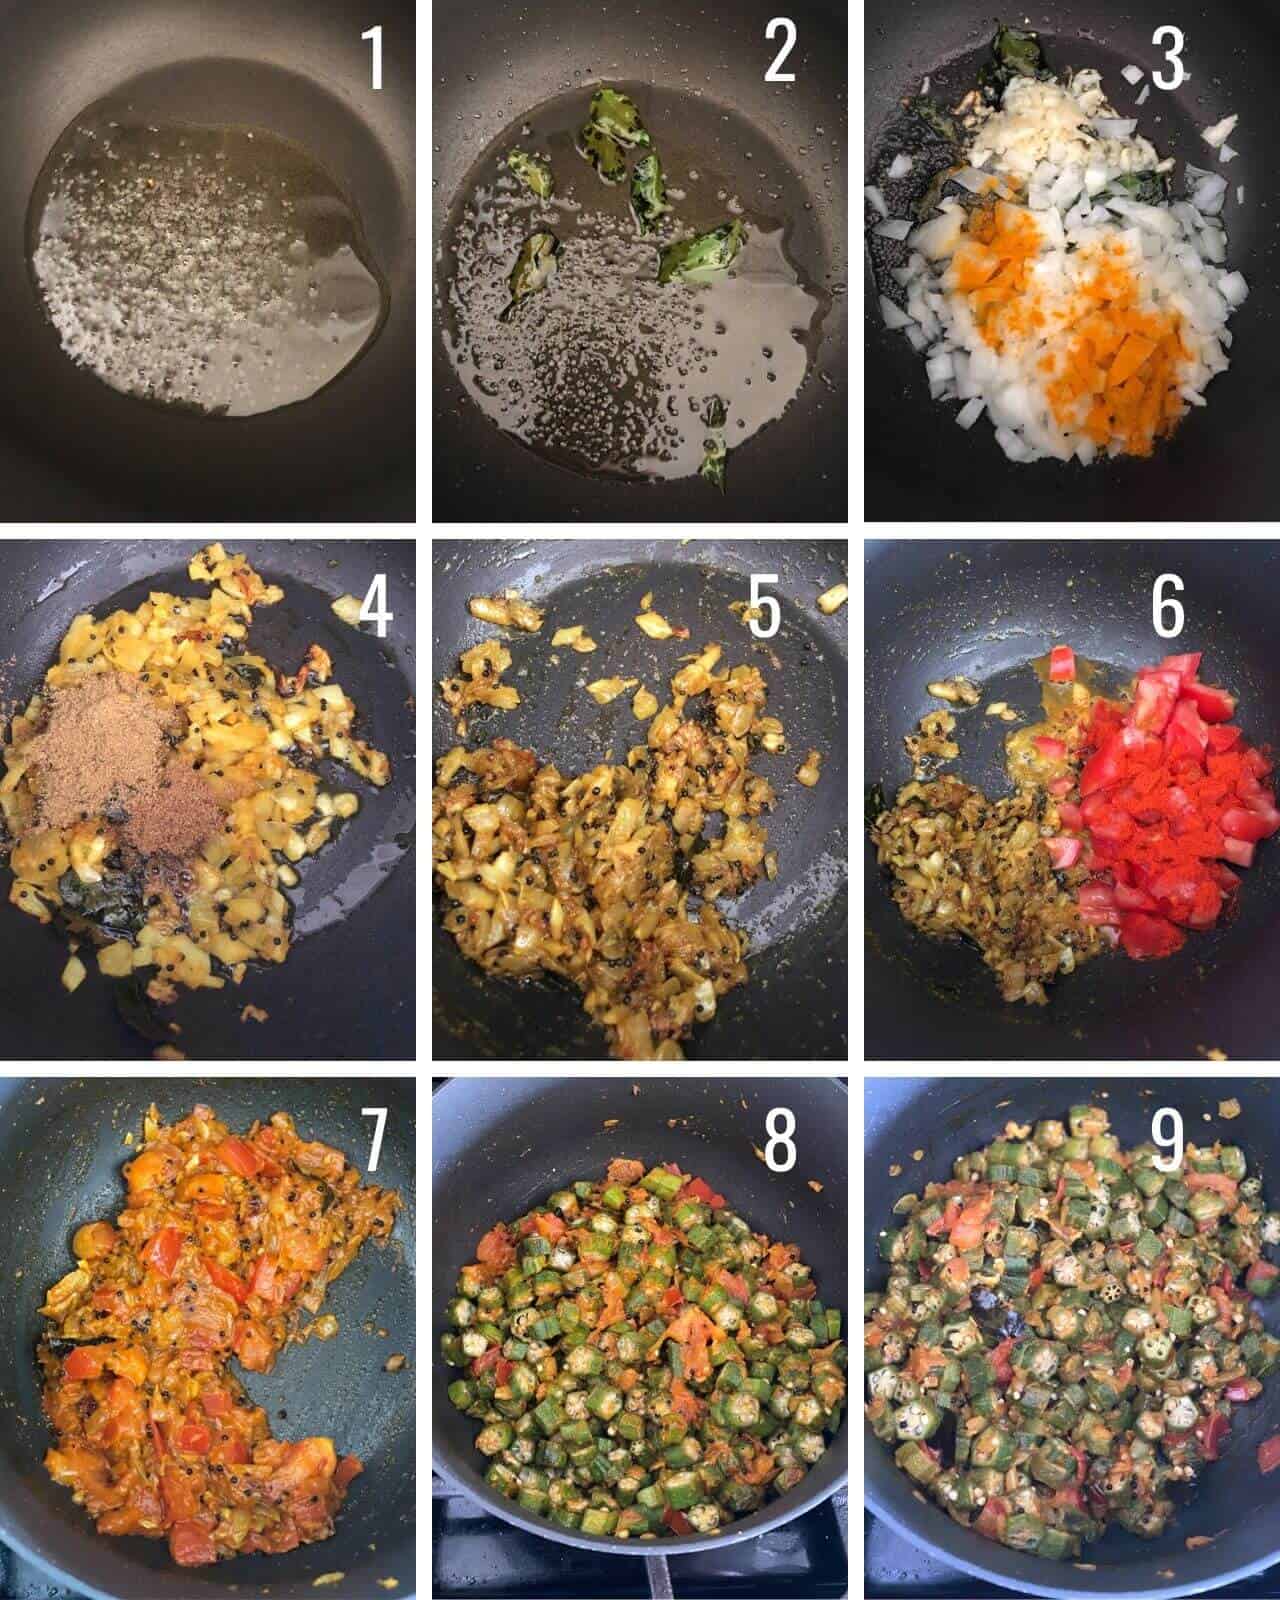 A collage of images showing how to make bhindi masala step by step